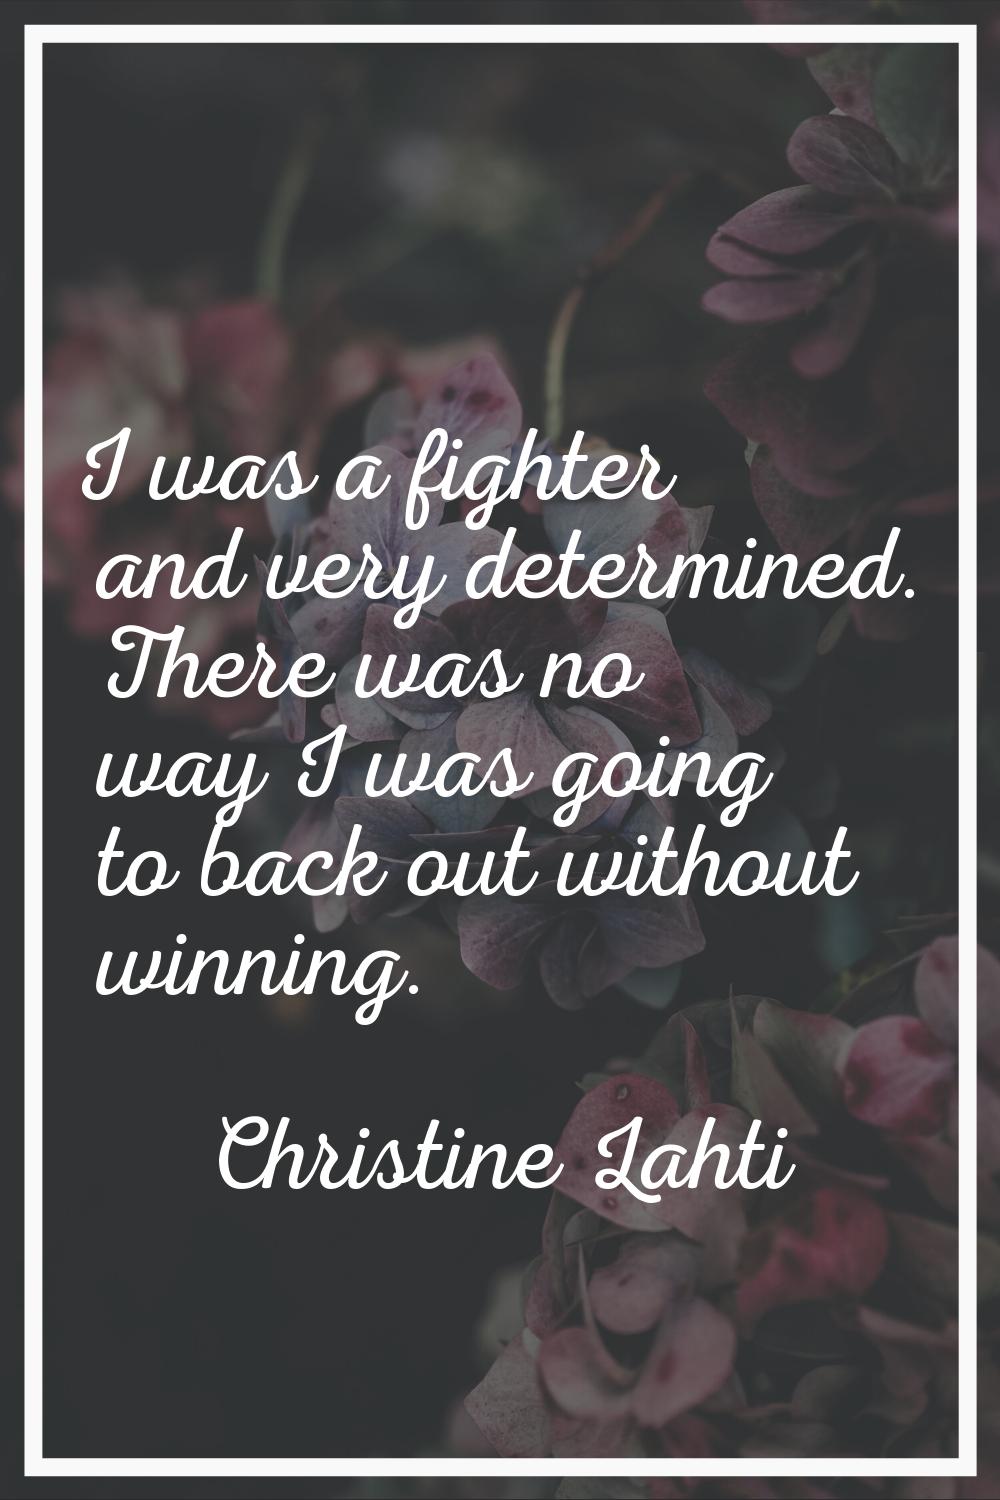 I was a fighter and very determined. There was no way I was going to back out without winning.